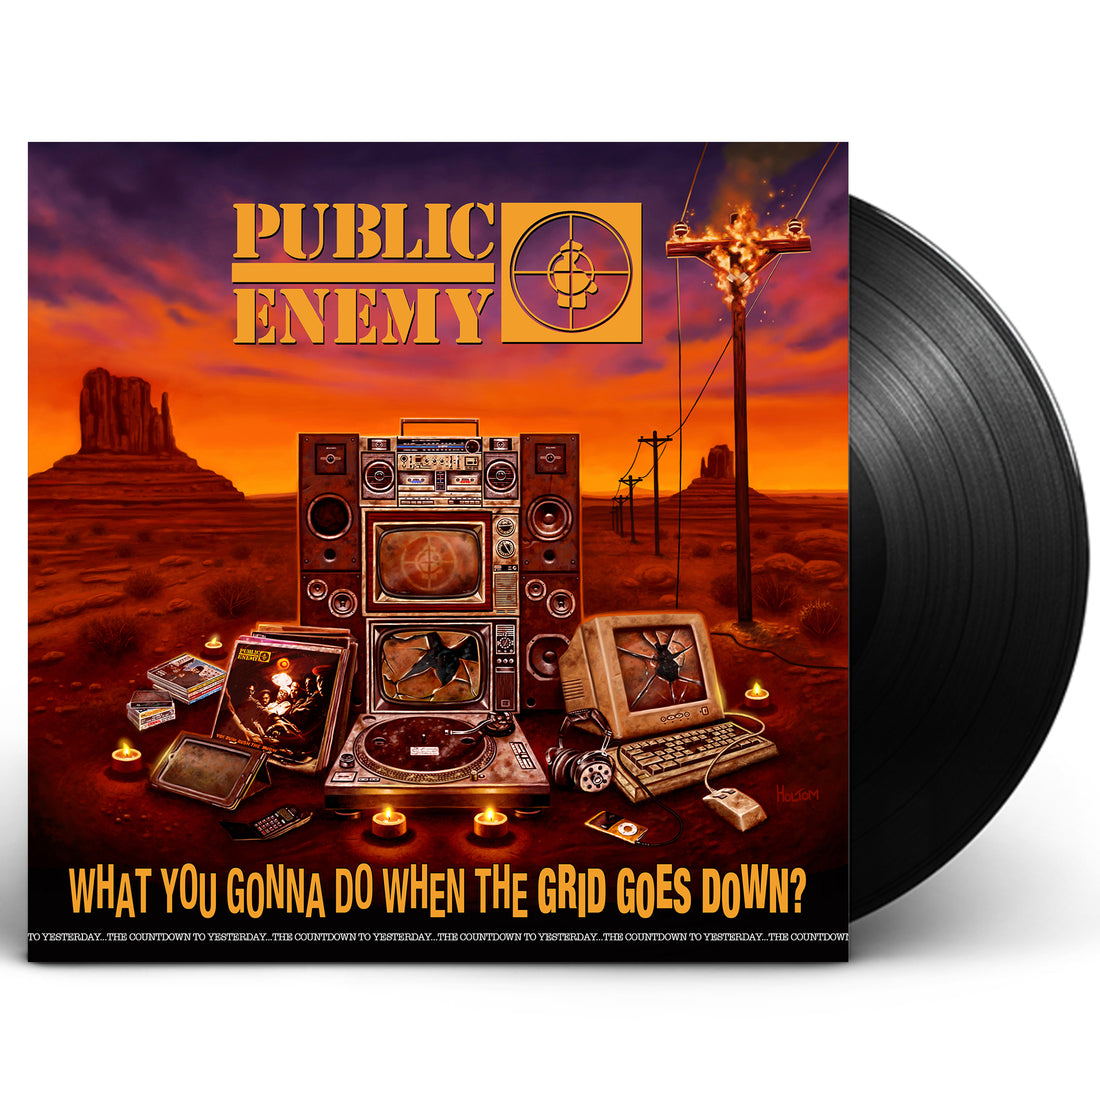 Public Enemy "What You Gonna Do When The Grid Goes Down?" LP